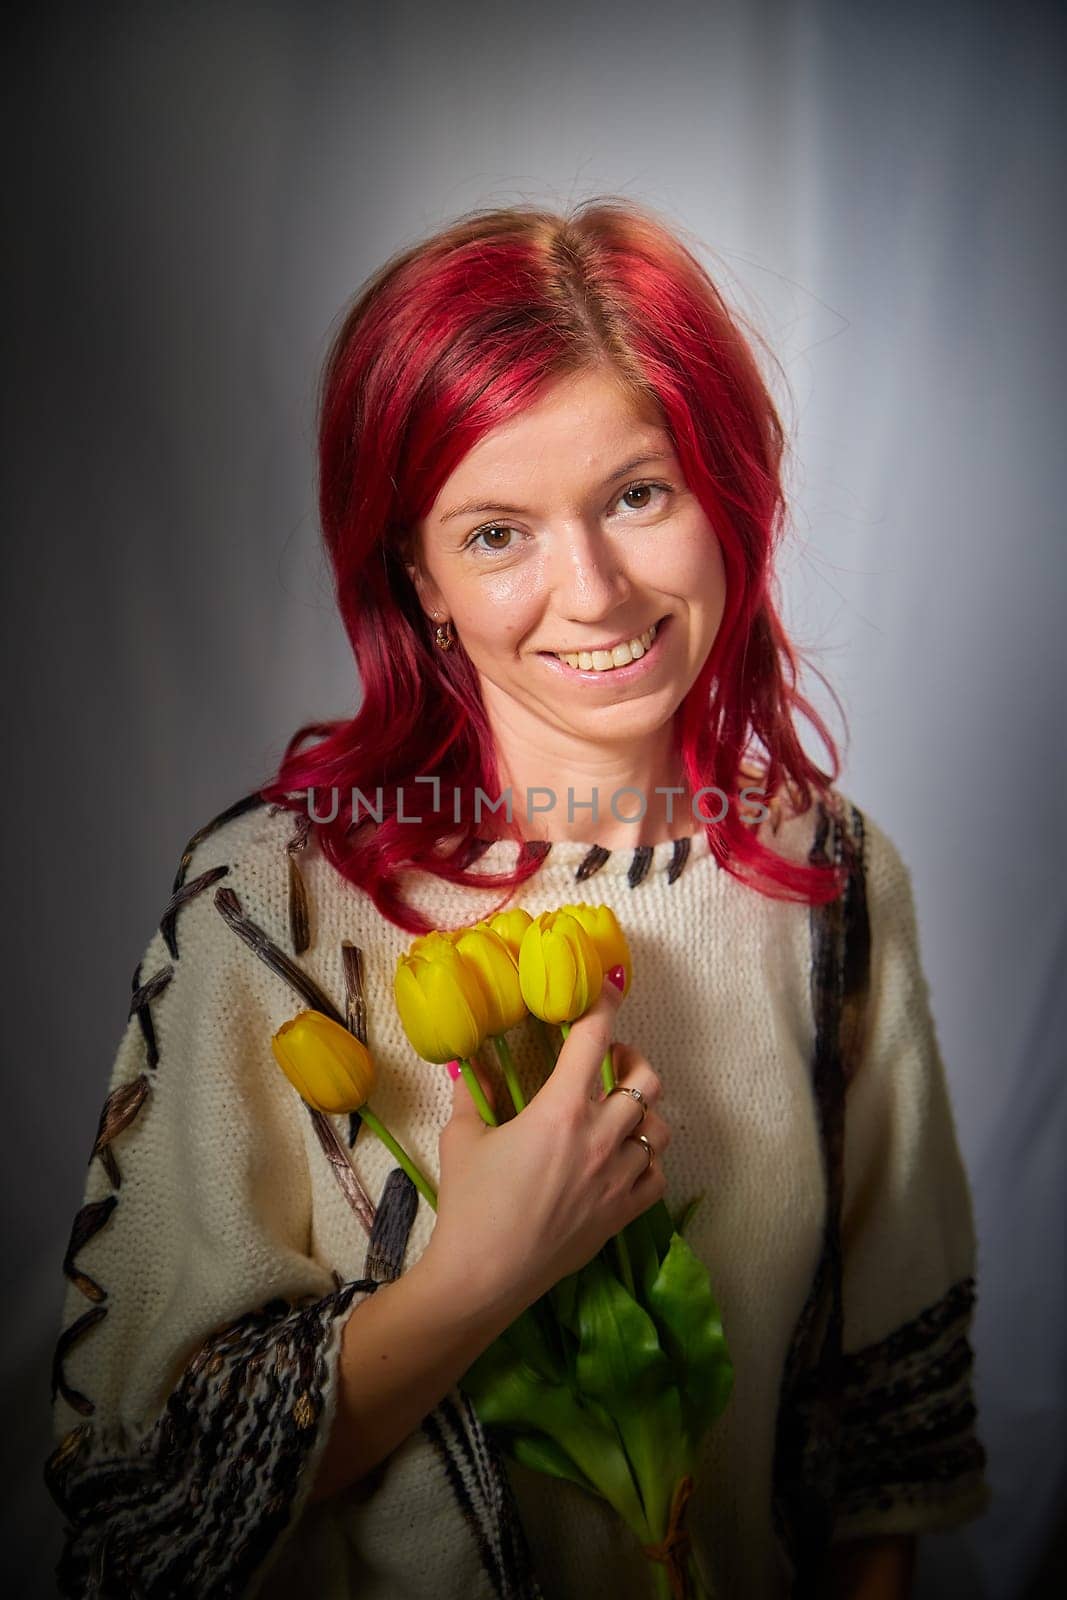 Beautiful woman with red hair on light background holds tulips. Inernational woman's day 8 March